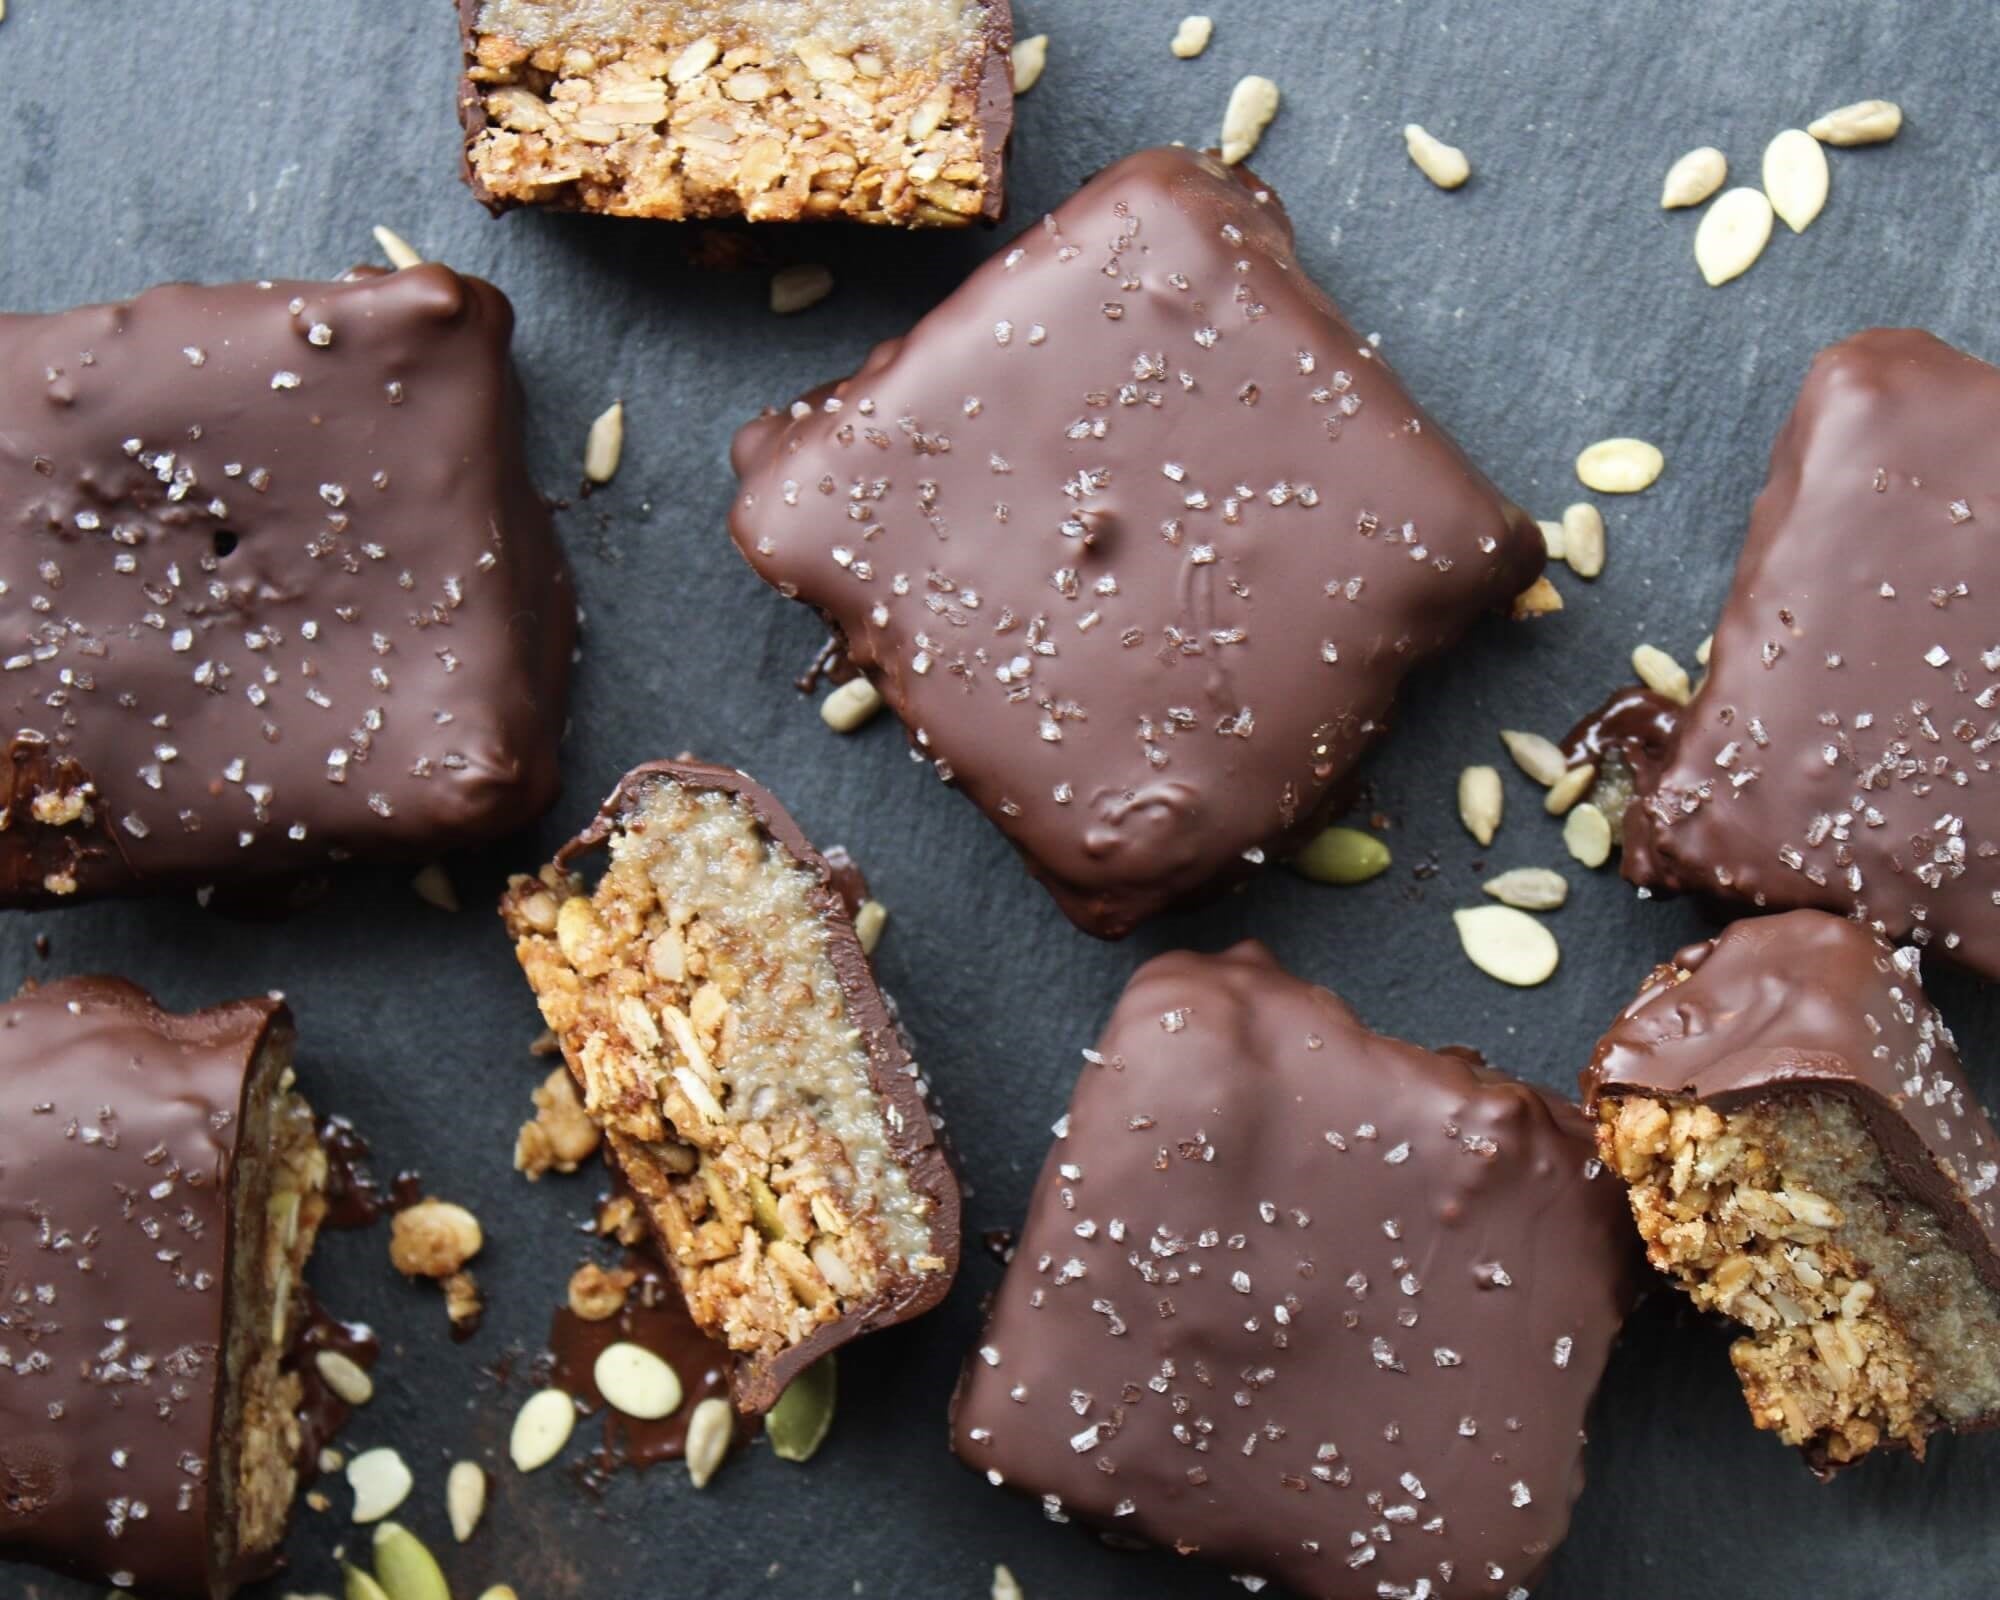 Chocolate Coated Sunbutter Granola Squares with Go Raw Sprouted Seeds